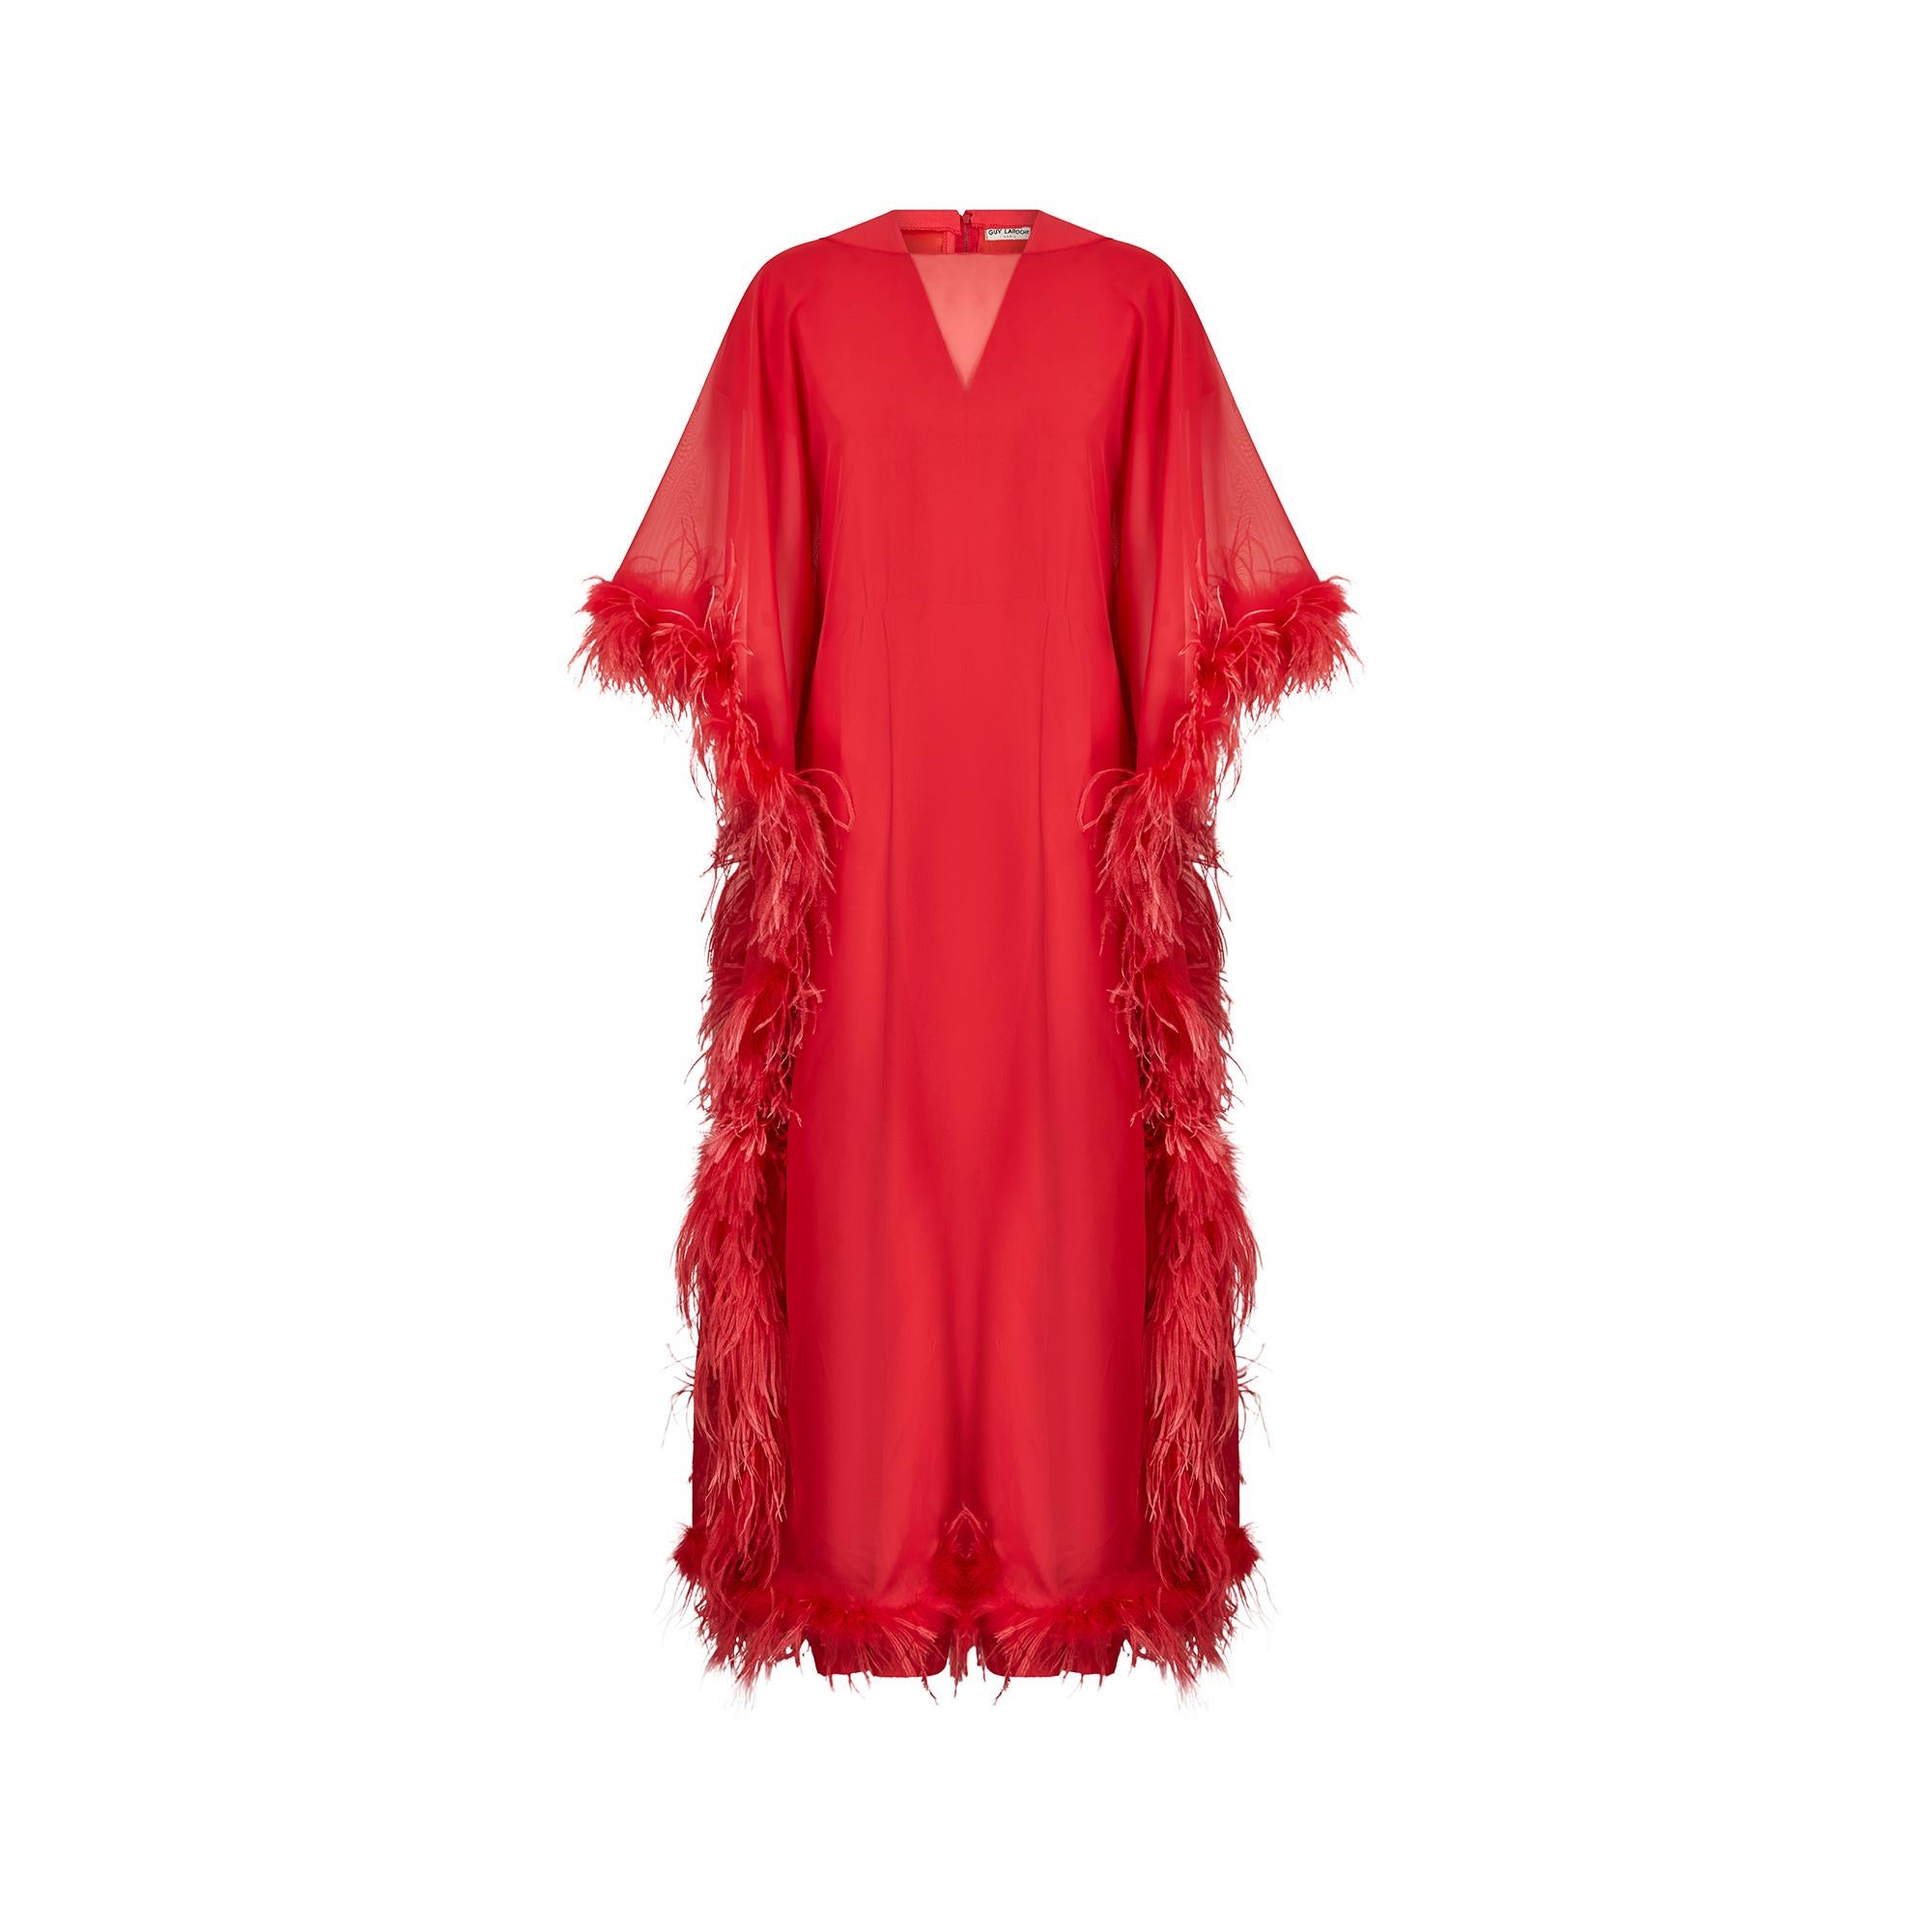 This original 1970s red feather dress ensemble by Guy Laroche is a high-end boutique piece or demi couture order and the perfect statement piece for any event or party. The ensemble is actually made up of two completely separate dresses which could